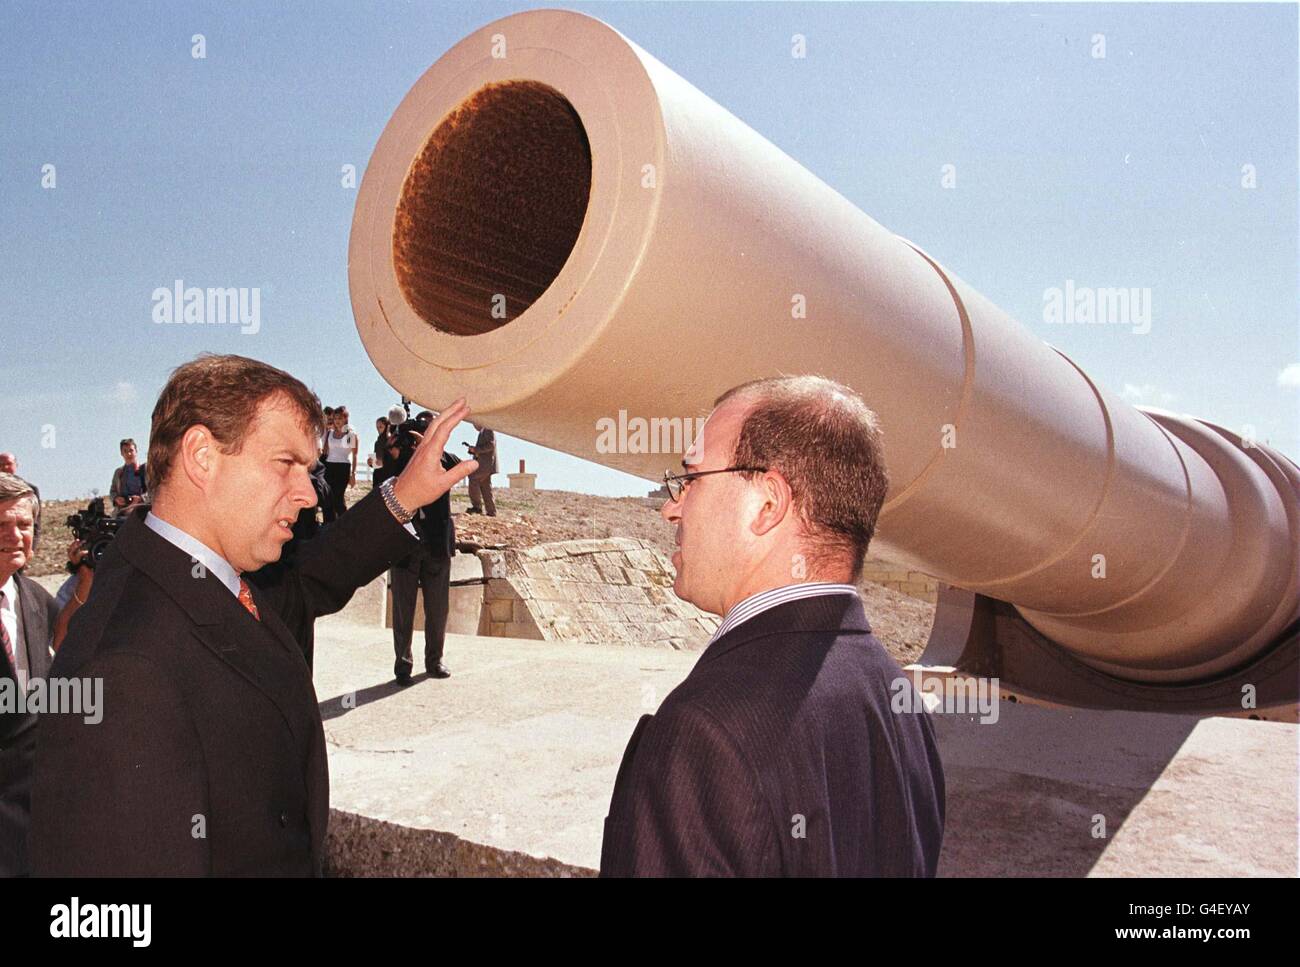 The Duke of York with guide Mario Farrugia, inspects the 100 ton gun at Fort Rinella on the coast near to Valletta, Malta this afternoon. The Duke is on a 2 day visit to the island. PHOTOGRAPH BY JOHN STILLWELL/PA. Stock Photo